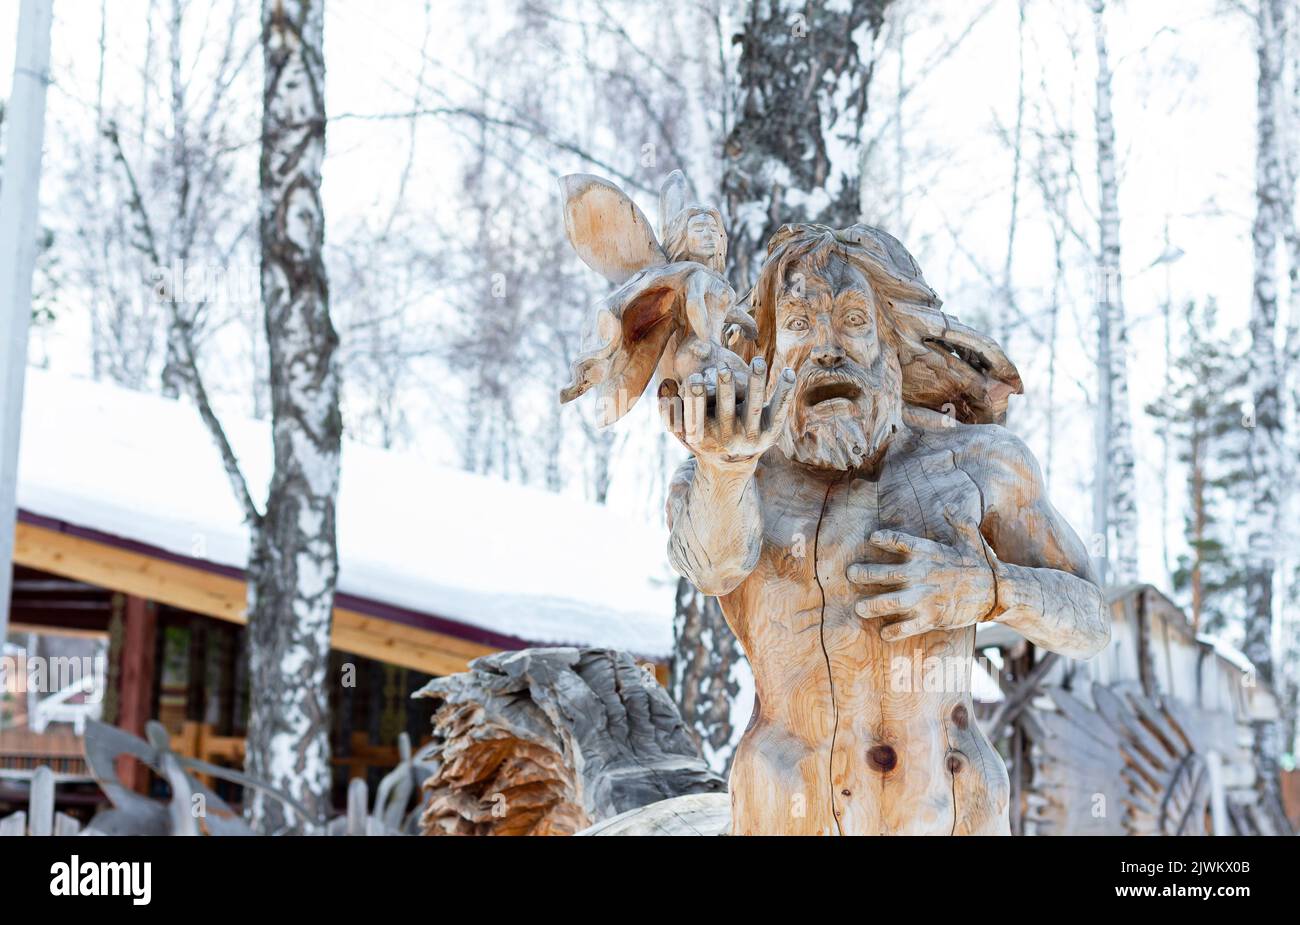 Siberian traditional wooden figurine. old wooden sculpture in the forest, Centaur holding a forest fairy in his hand. Siberia, Park Outskirts. Carved Stock Photo